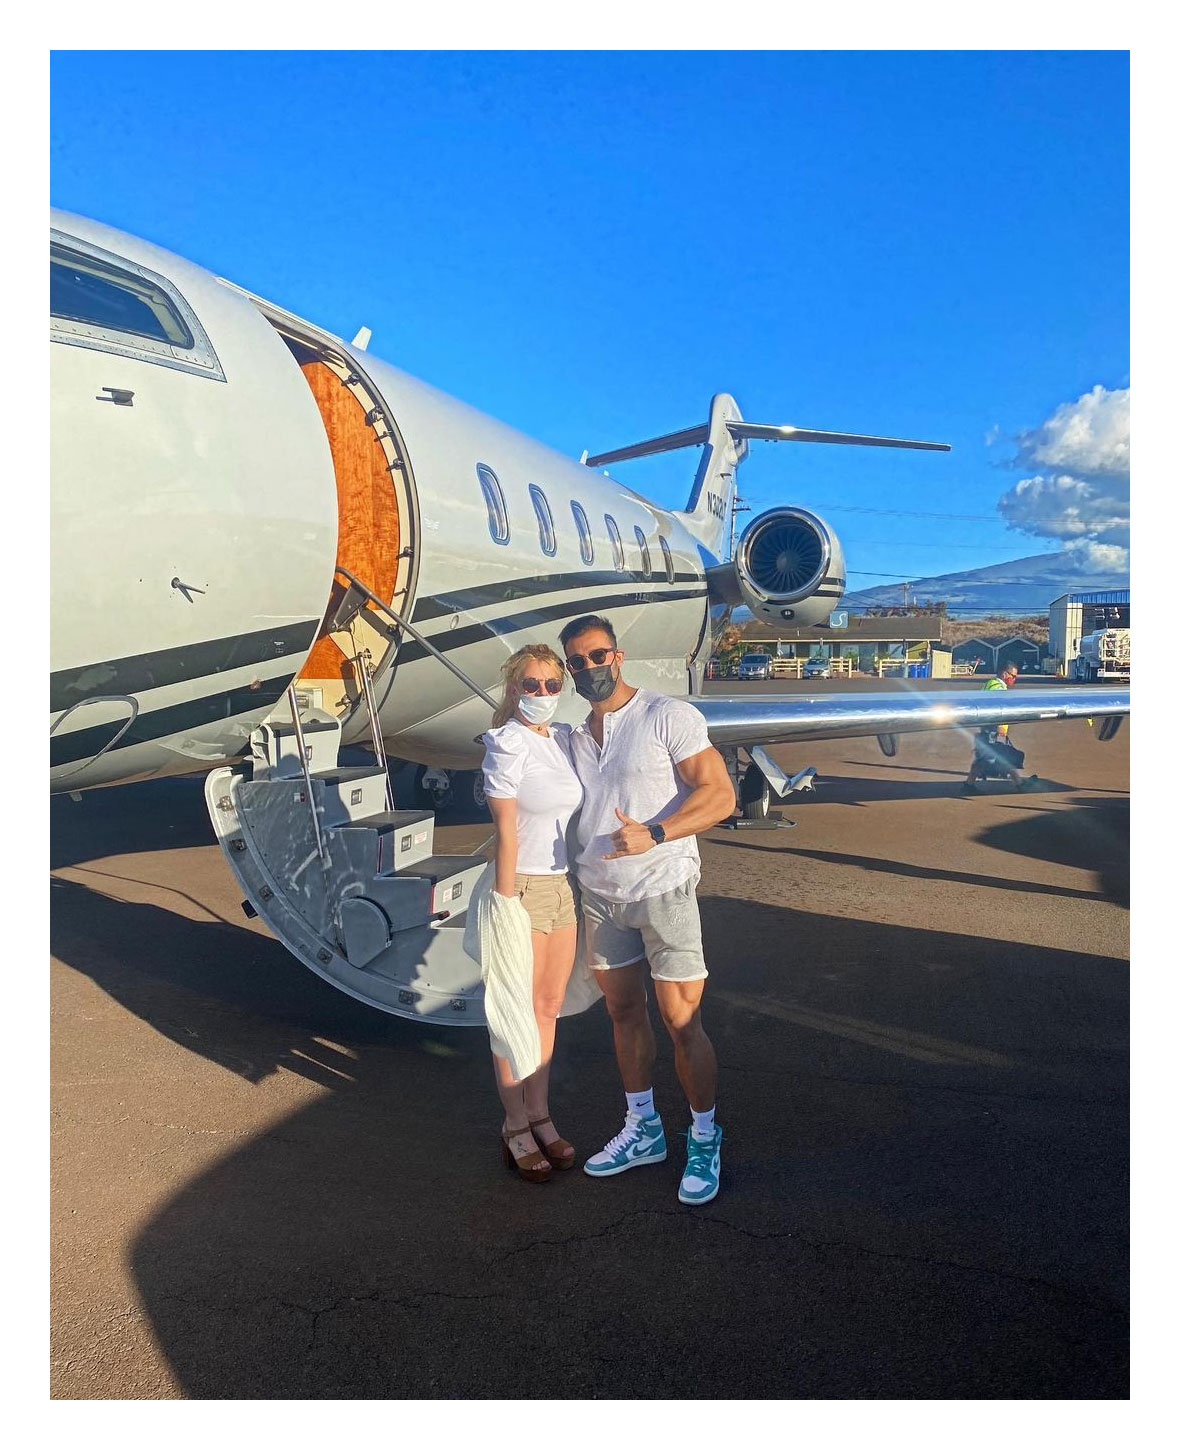 Britney Spears Jets to Hawaii for Early Birthday Trip With Boyfriend Sam Asghari